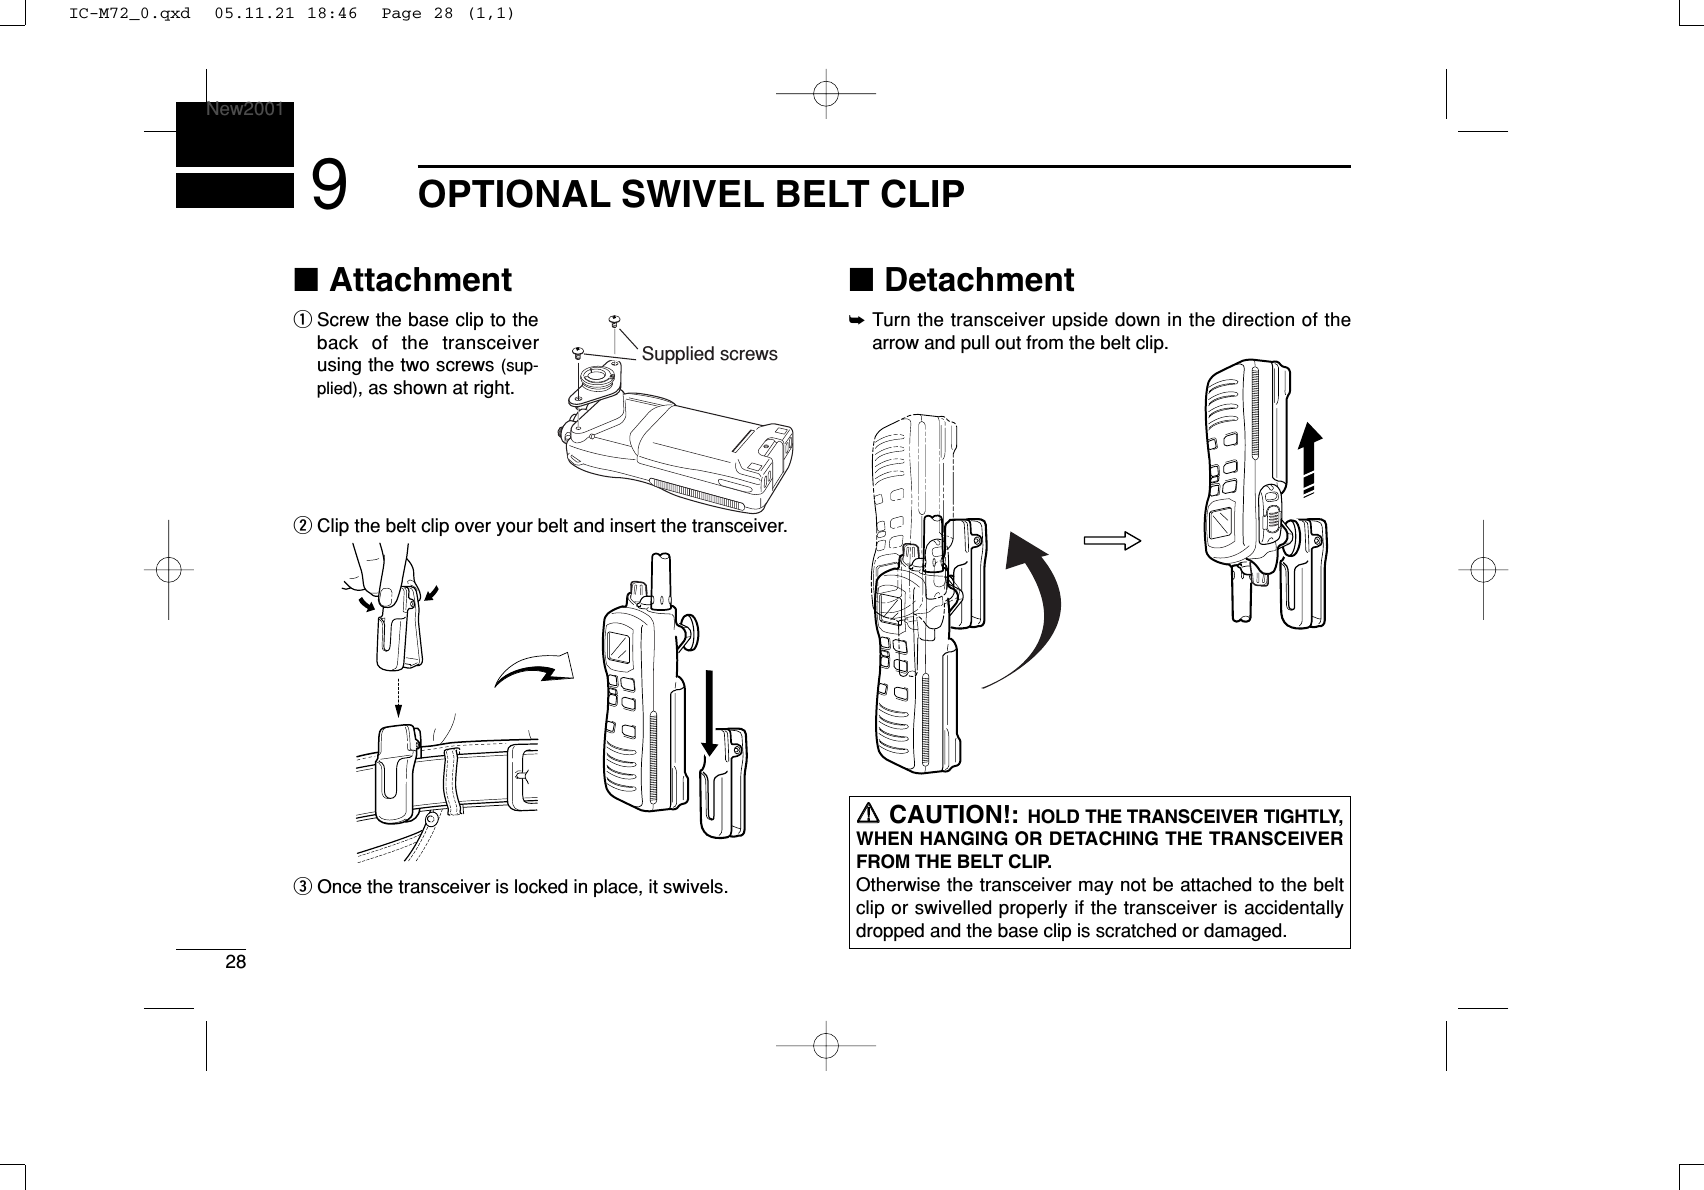 28OPTIONAL SWIVEL BELT CLIPNew20019■AttachmentqScrew the base clip to theback of the transceiverusing the two screws (sup-plied), as shown at right.wClip the belt clip over your belt and insert the transceiver.eOnce the transceiver is locked in place, it swivels.■Detachment➥Turn the transceiver upside down in the direction of thearrow and pull out from the belt clip.RRCAUTION!: HOLD THE TRANSCEIVER TIGHTLY,WHEN HANGING OR DETACHING THE TRANSCEIVERFROM THE BELT CLIP.Otherwise the transceiver may not be attached to the beltclip or swivelled properly if the transceiver is accidentallydropped and the base clip is scratched or damaged.Supplied screwsIC-M72_0.qxd  05.11.21 18:46  Page 28 (1,1)